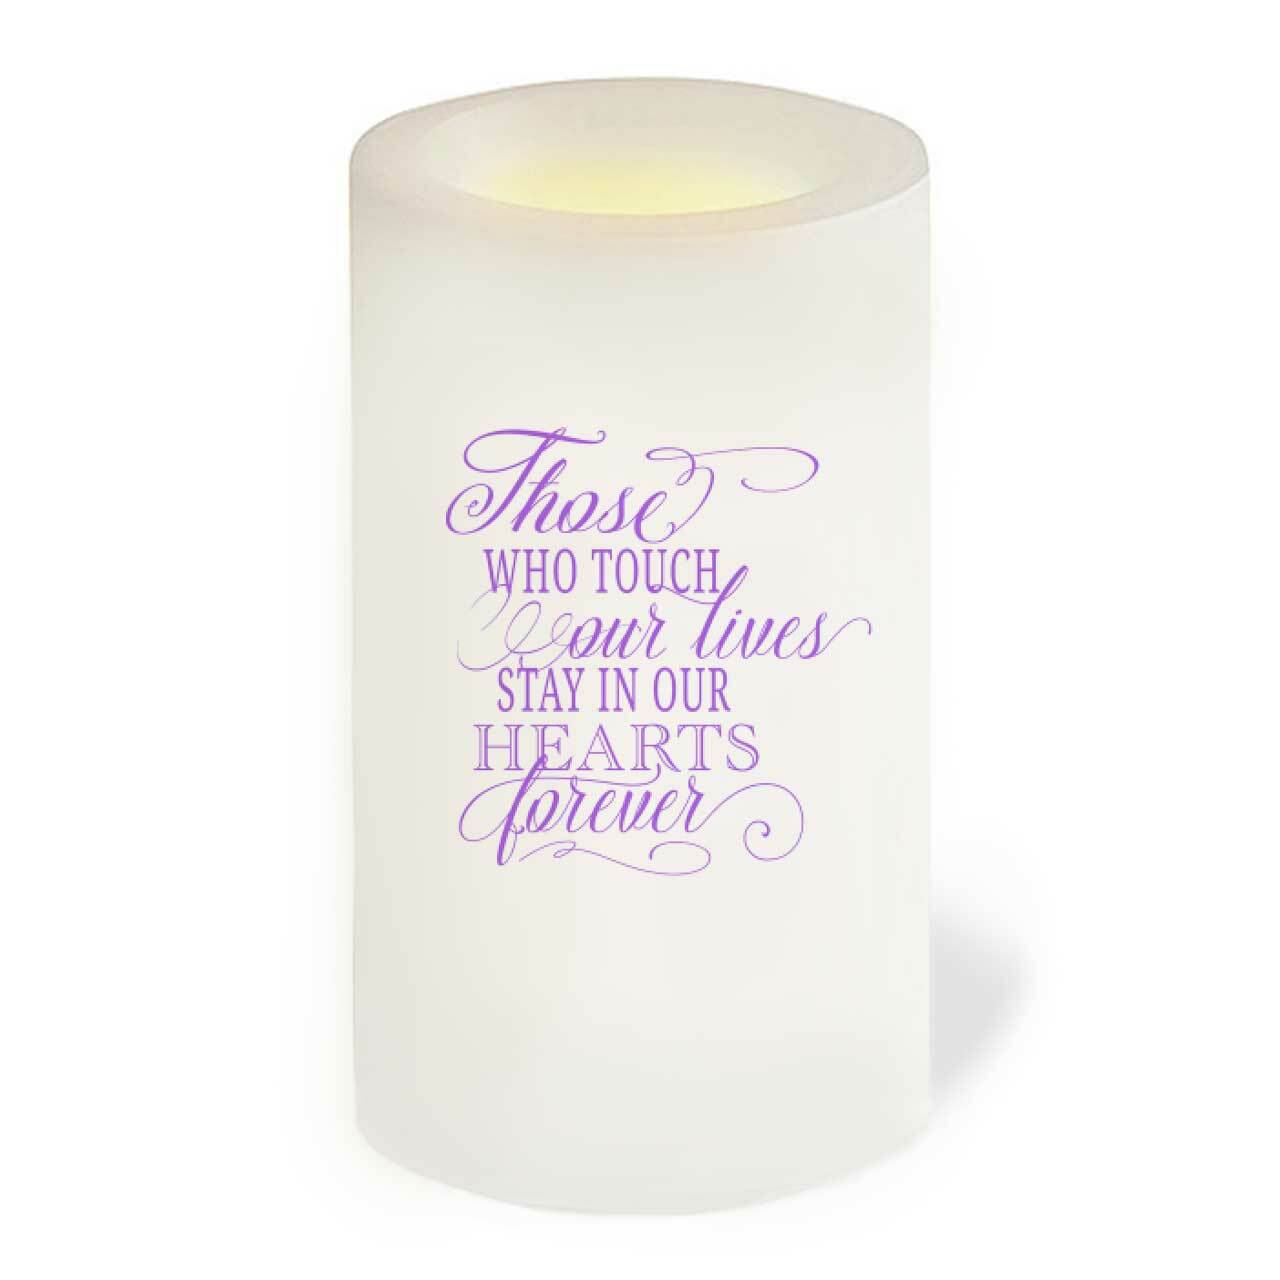 For Her LED Flameless Personalized Memorial Candle.